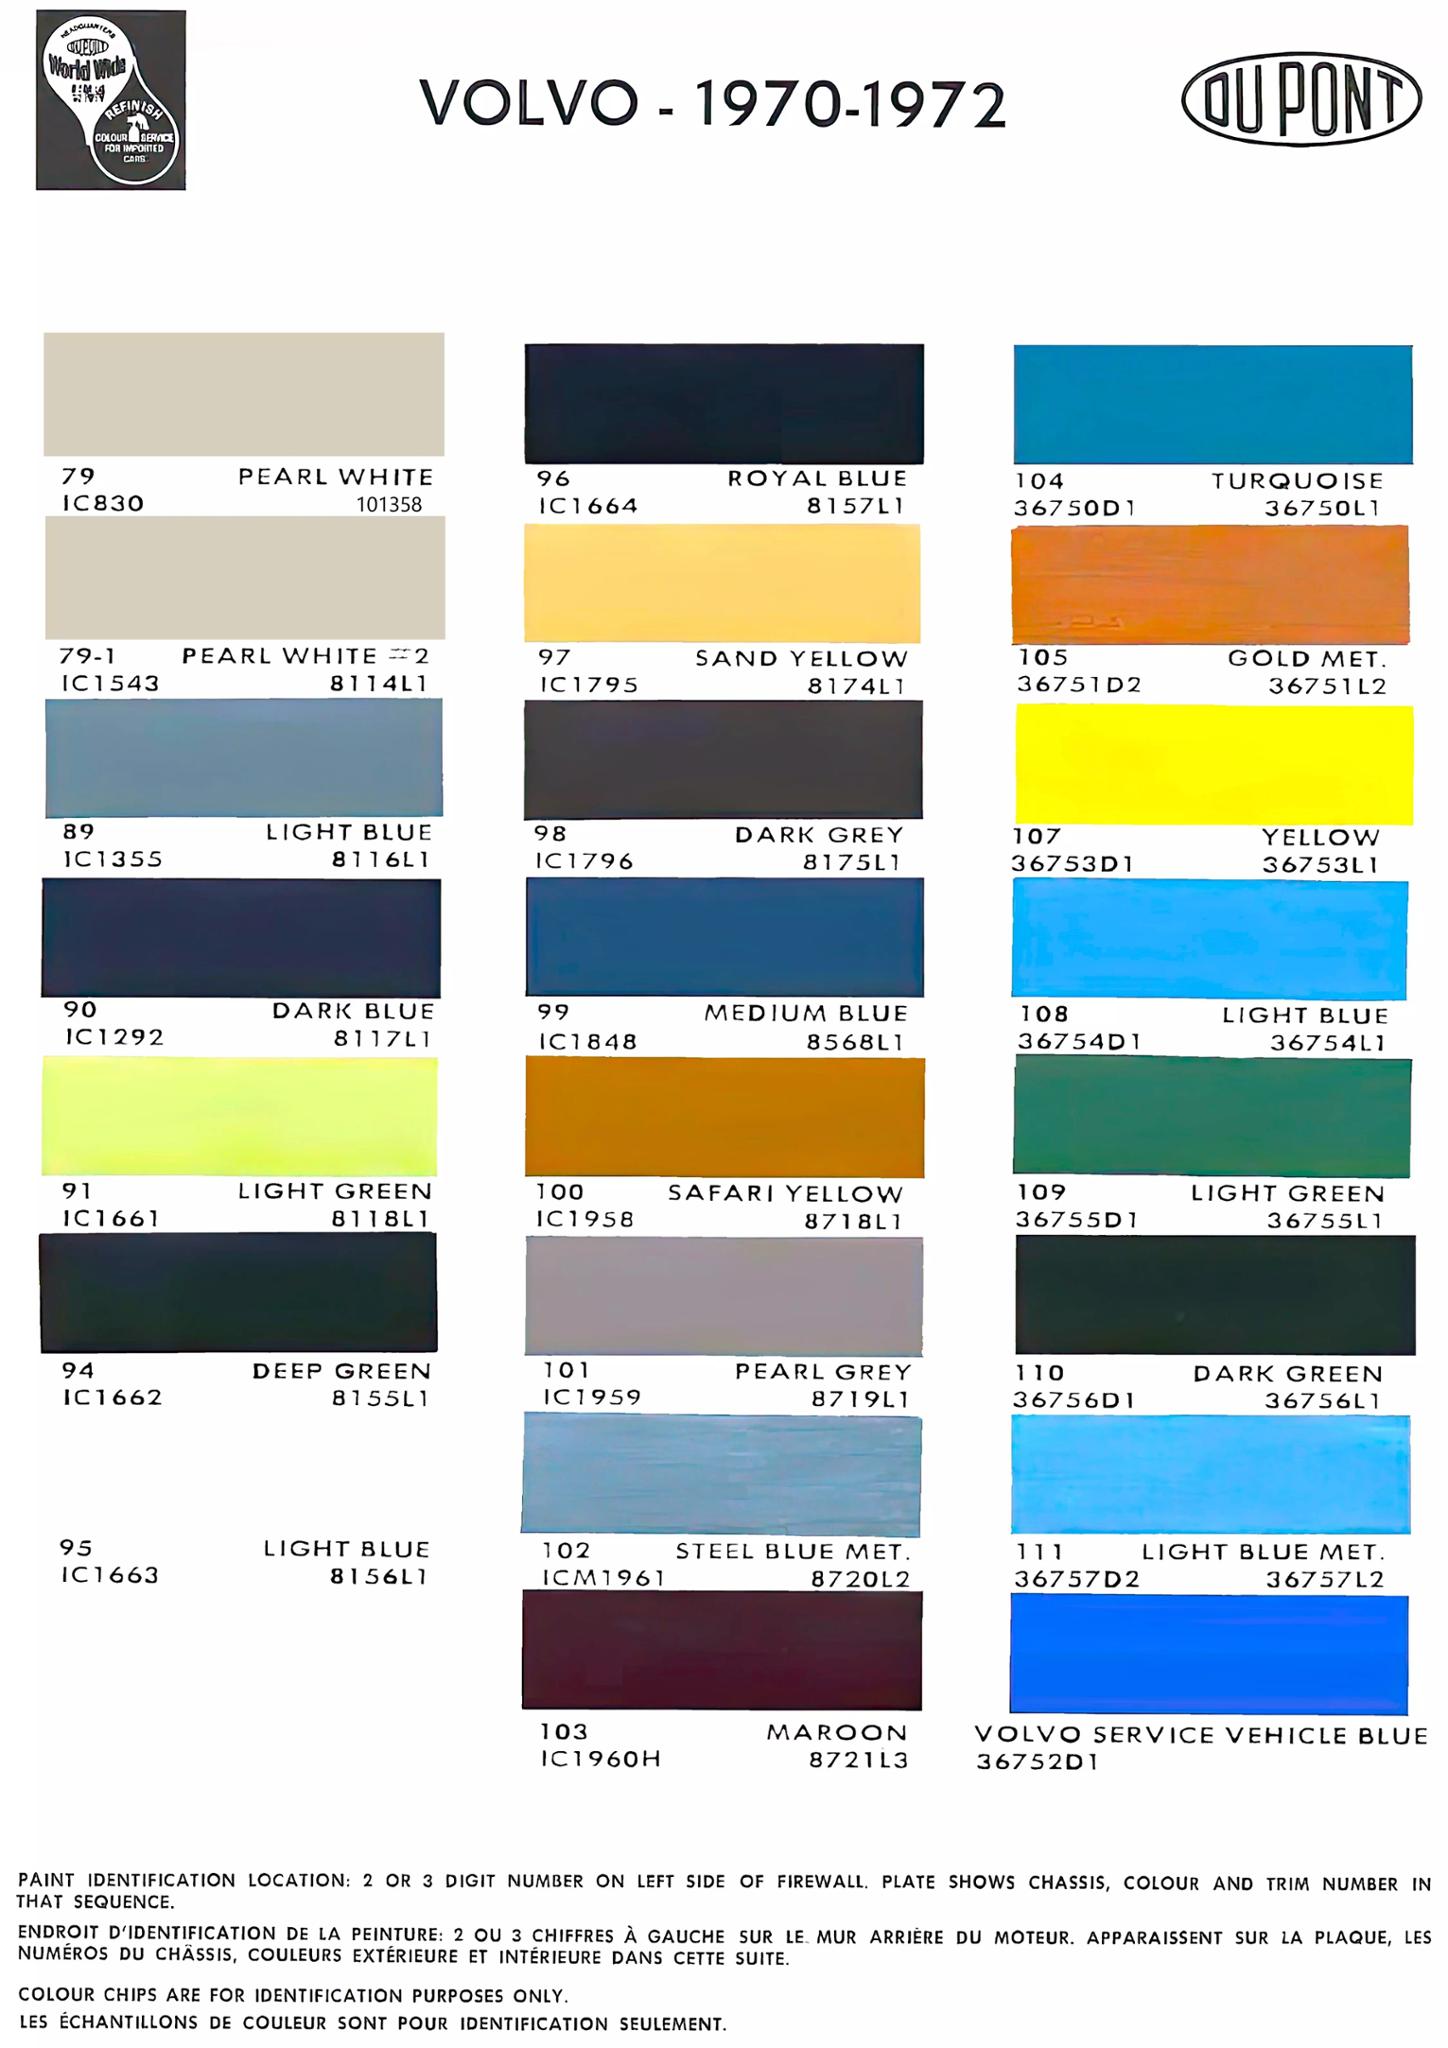 Oem paint codes, Color shades, paint chips and mixing stock numbers used on Volvo Automobiles